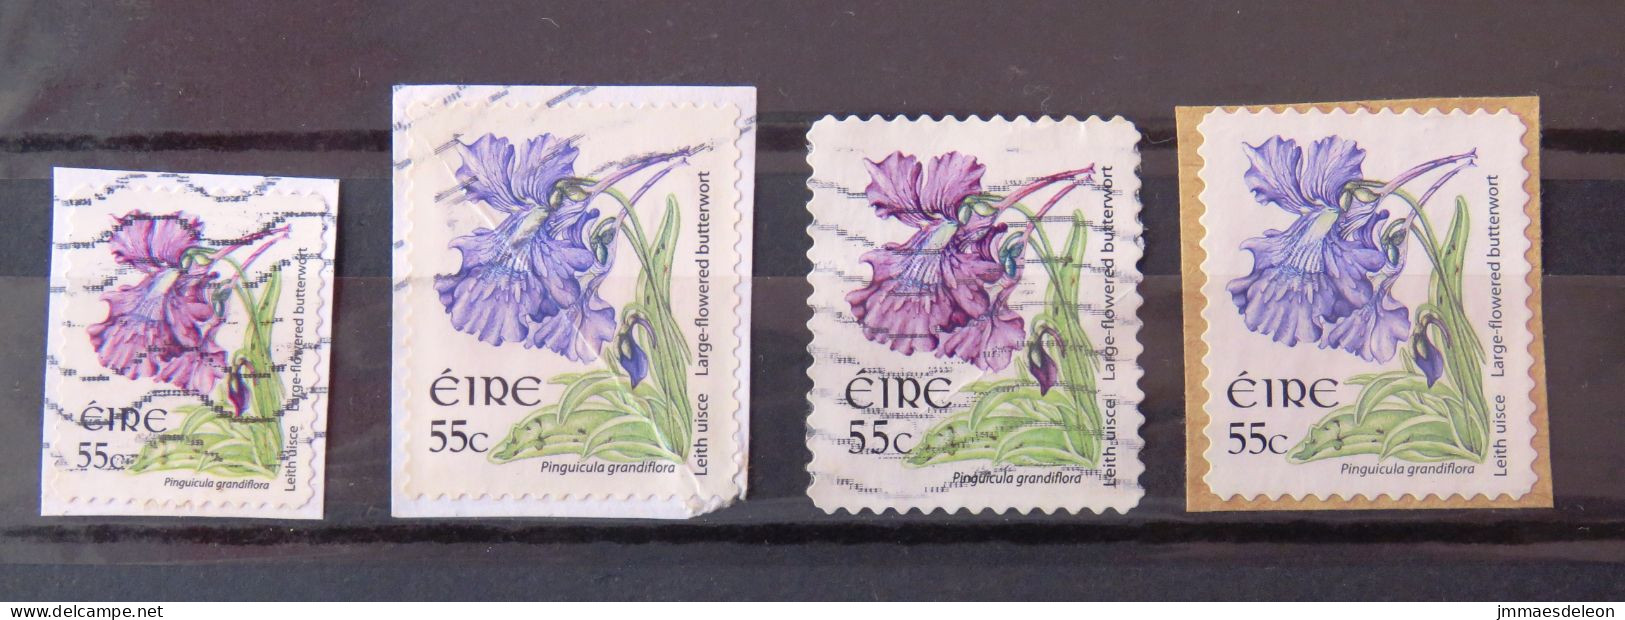 Ireland 2007 Flowers - 3 Different, 1 Smeller Sie, 2 Different Perforations, One Different Color - Usados